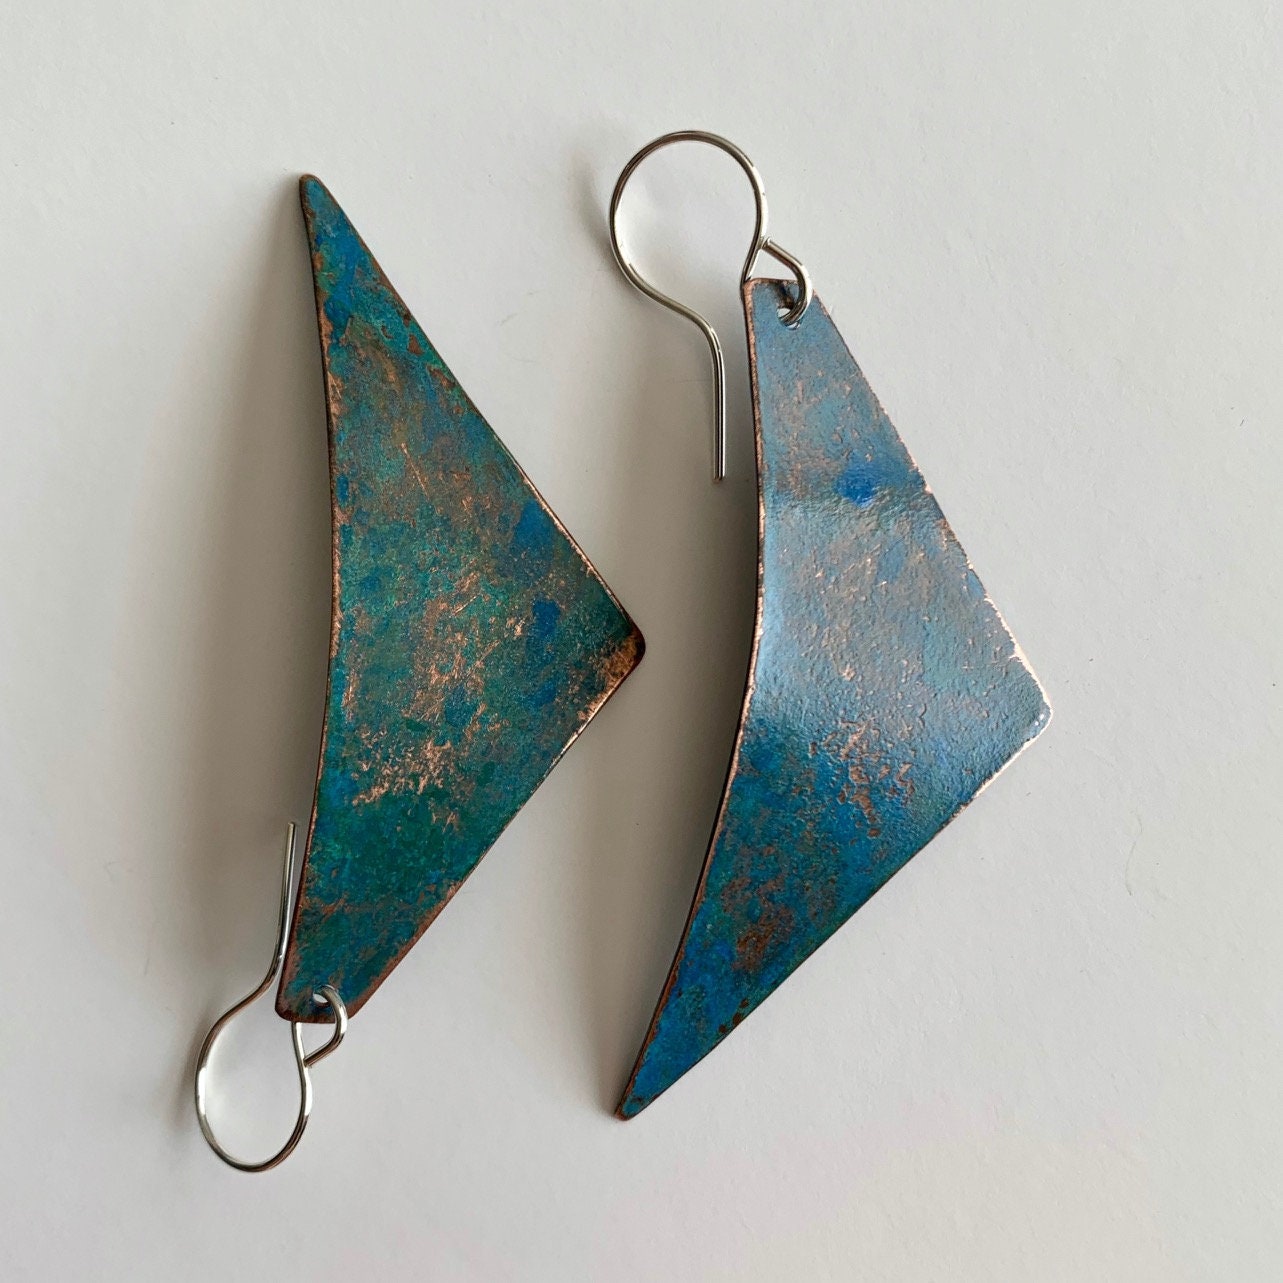 Curved Copper Earrings with Patina Rustic Triangle Artisan | Etsy